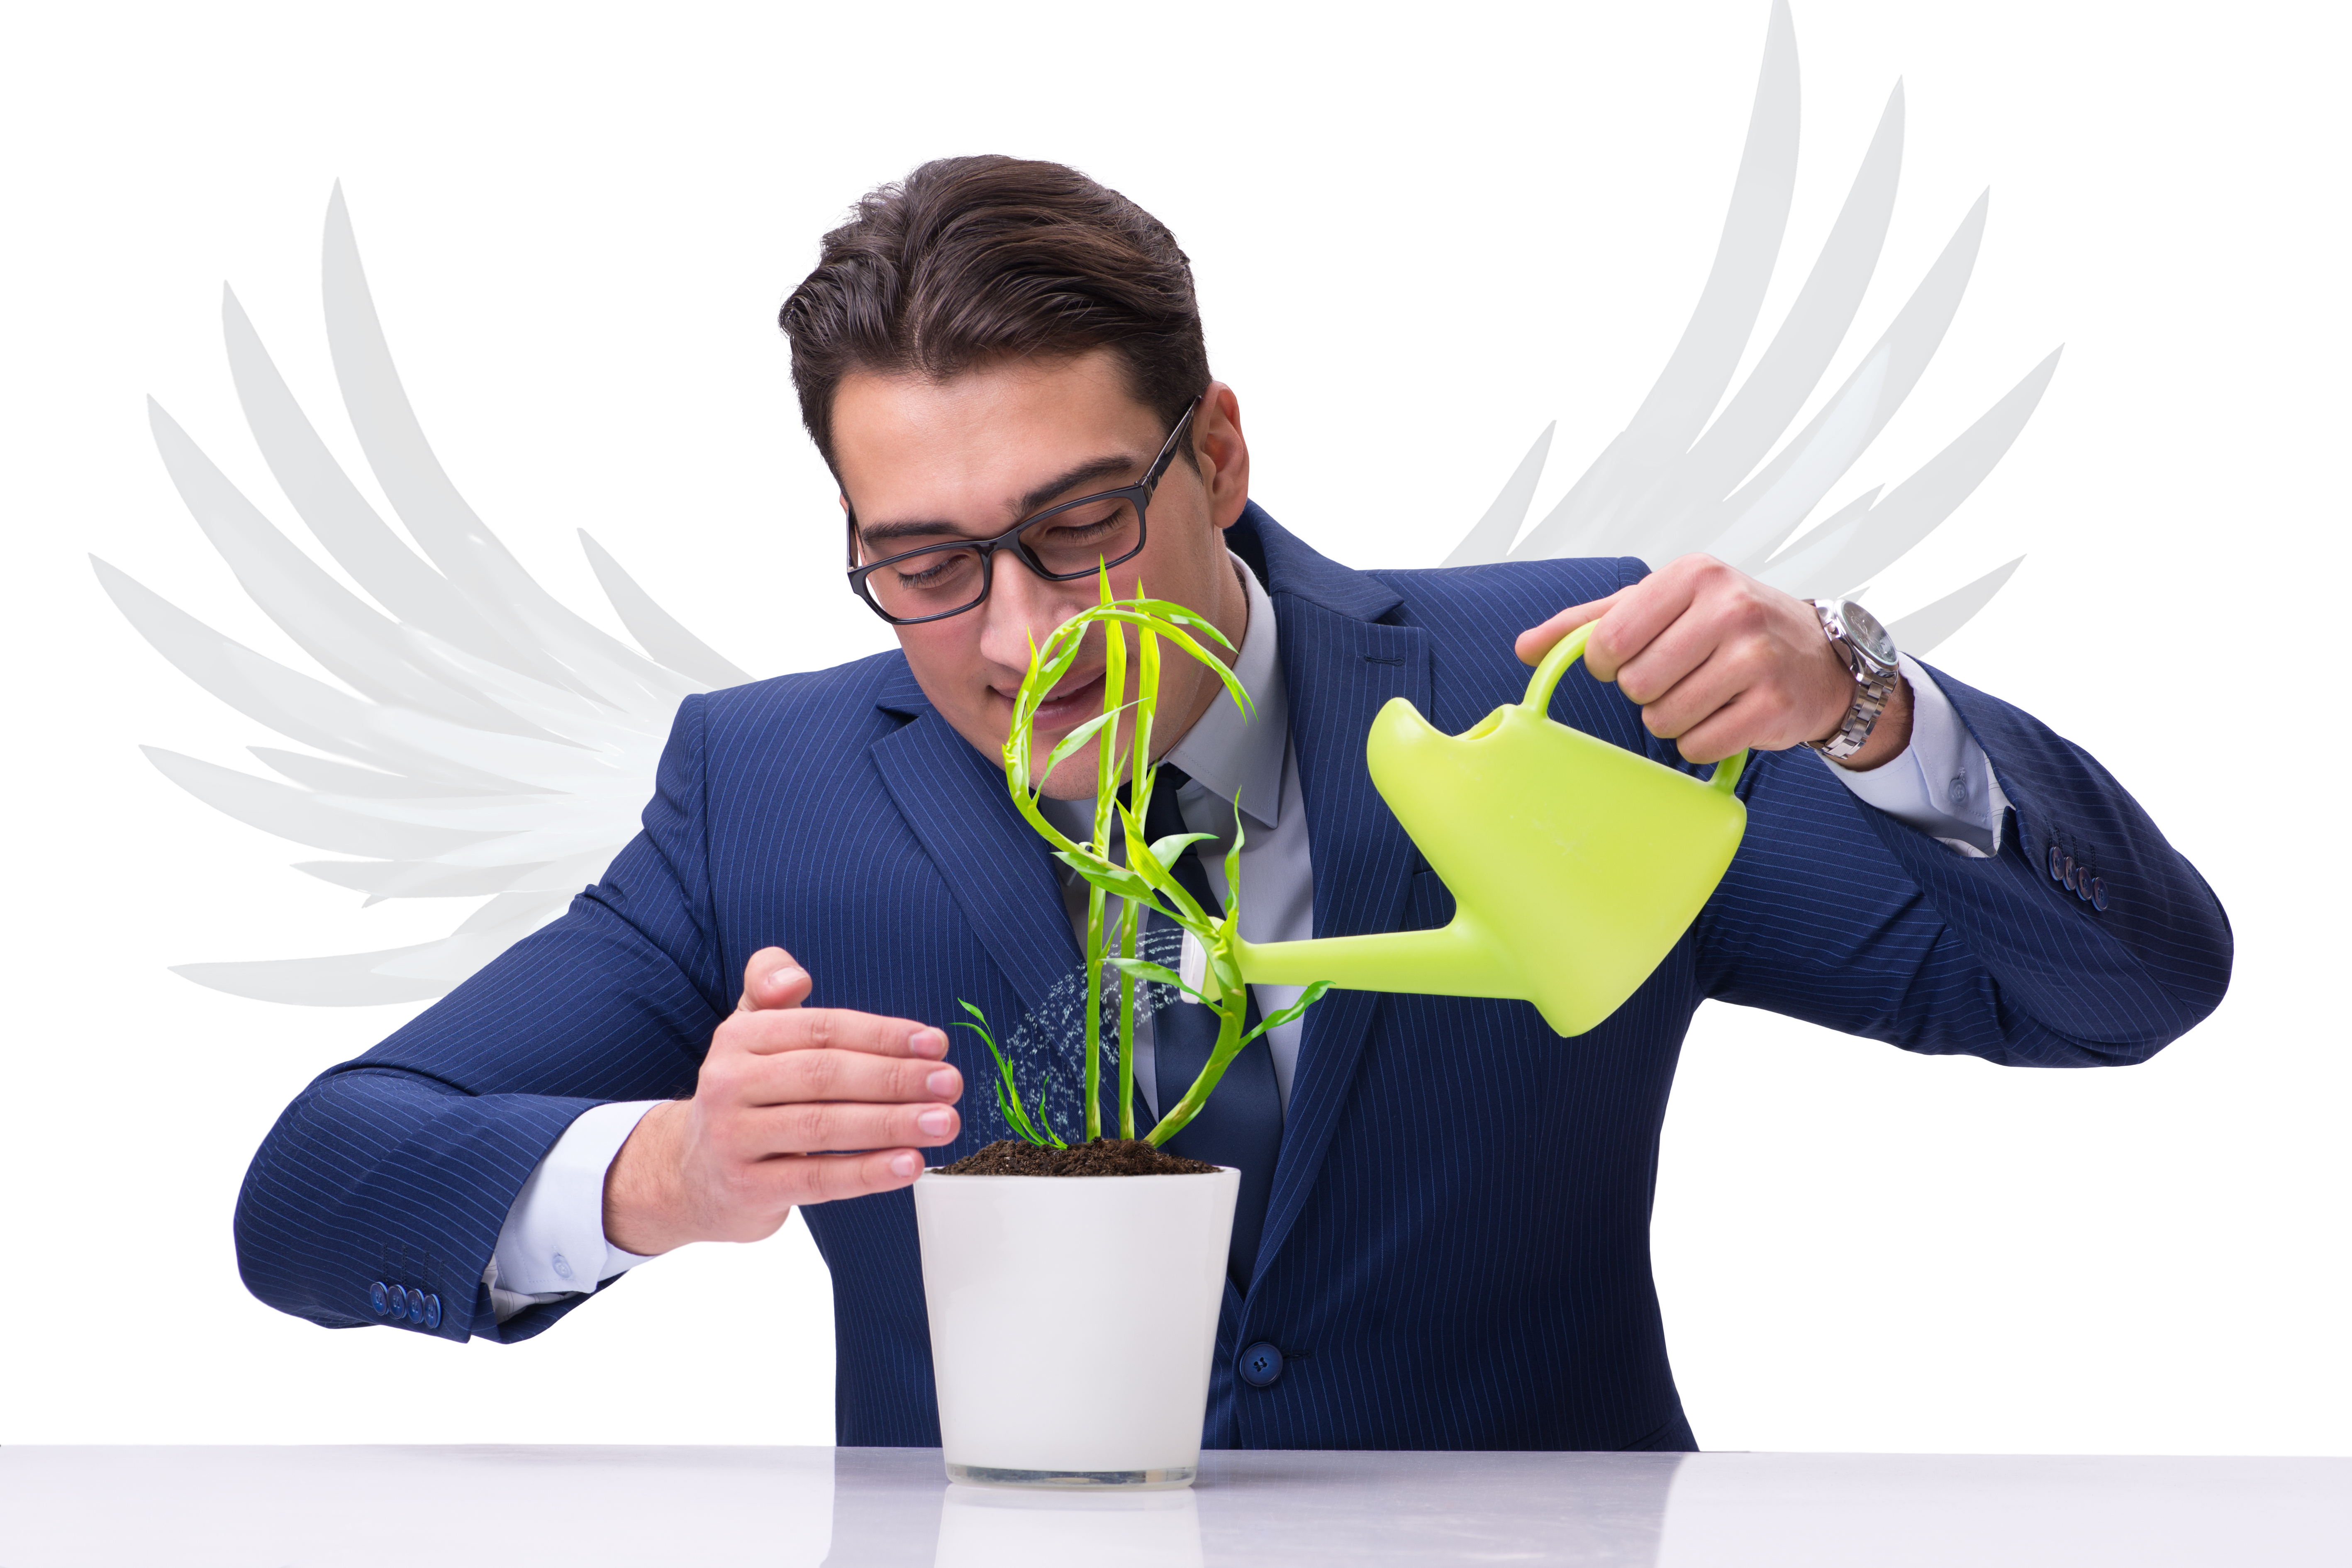 Entrepreneurs can look to angel investors for potential funding